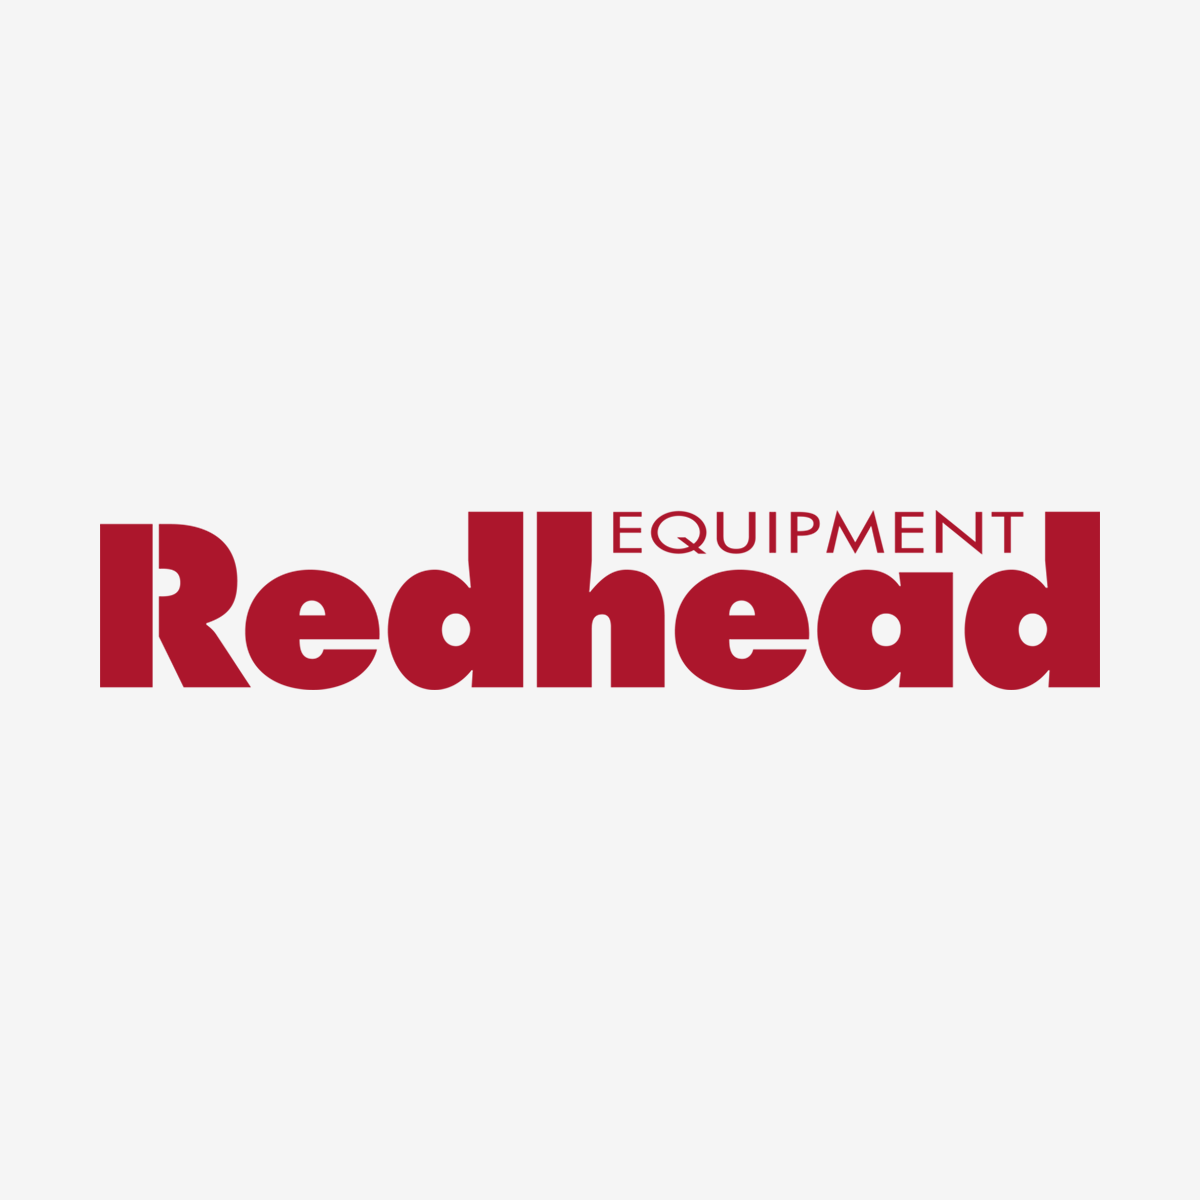 Redhead Logo - Redhead Equipment | Equipment you can count on to get the job done